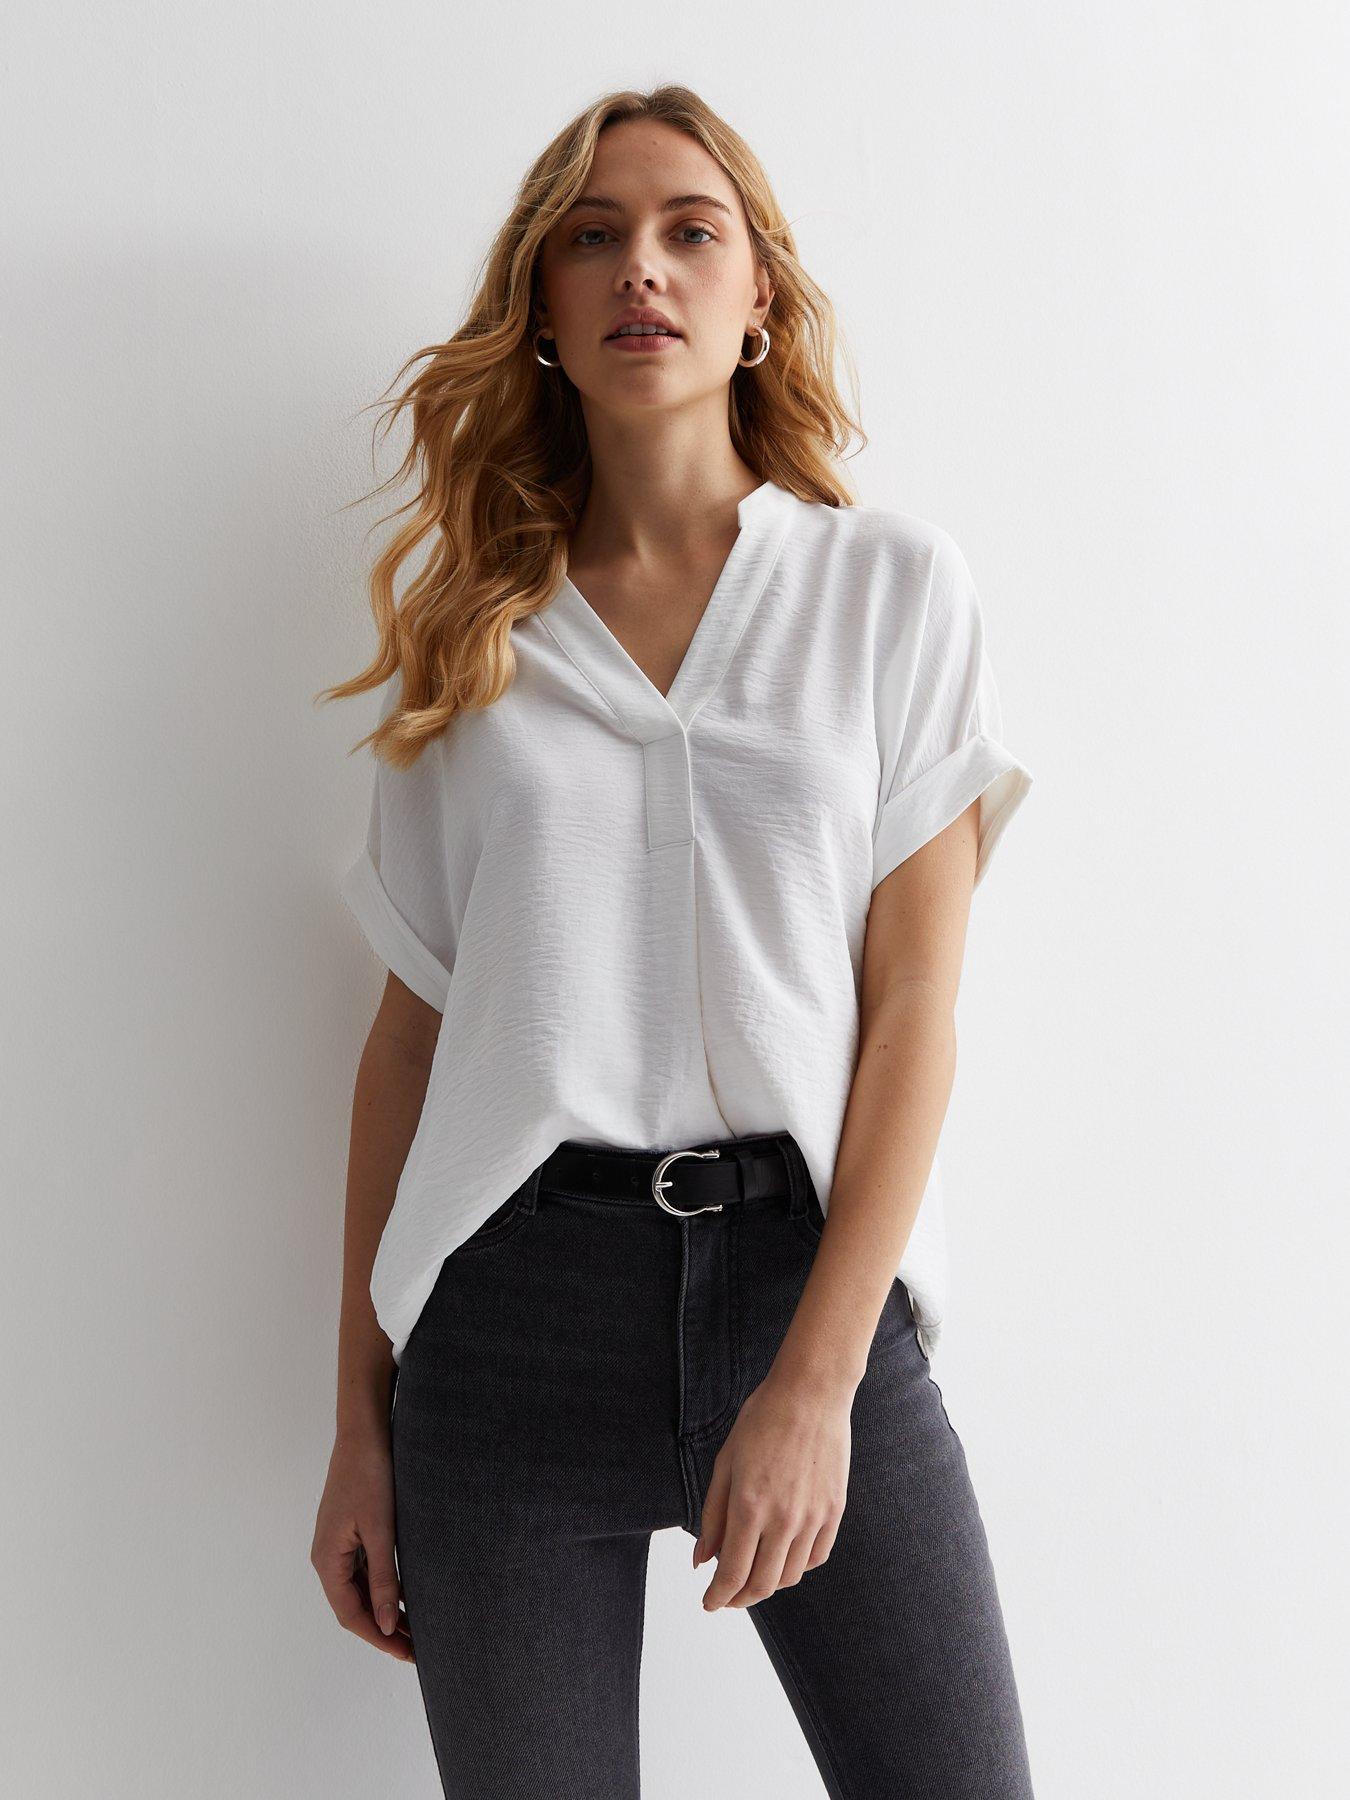 Plunging Neck Rolled-Up Sleeve Blouse  Women shirts blouse, Women, V neck  blouse